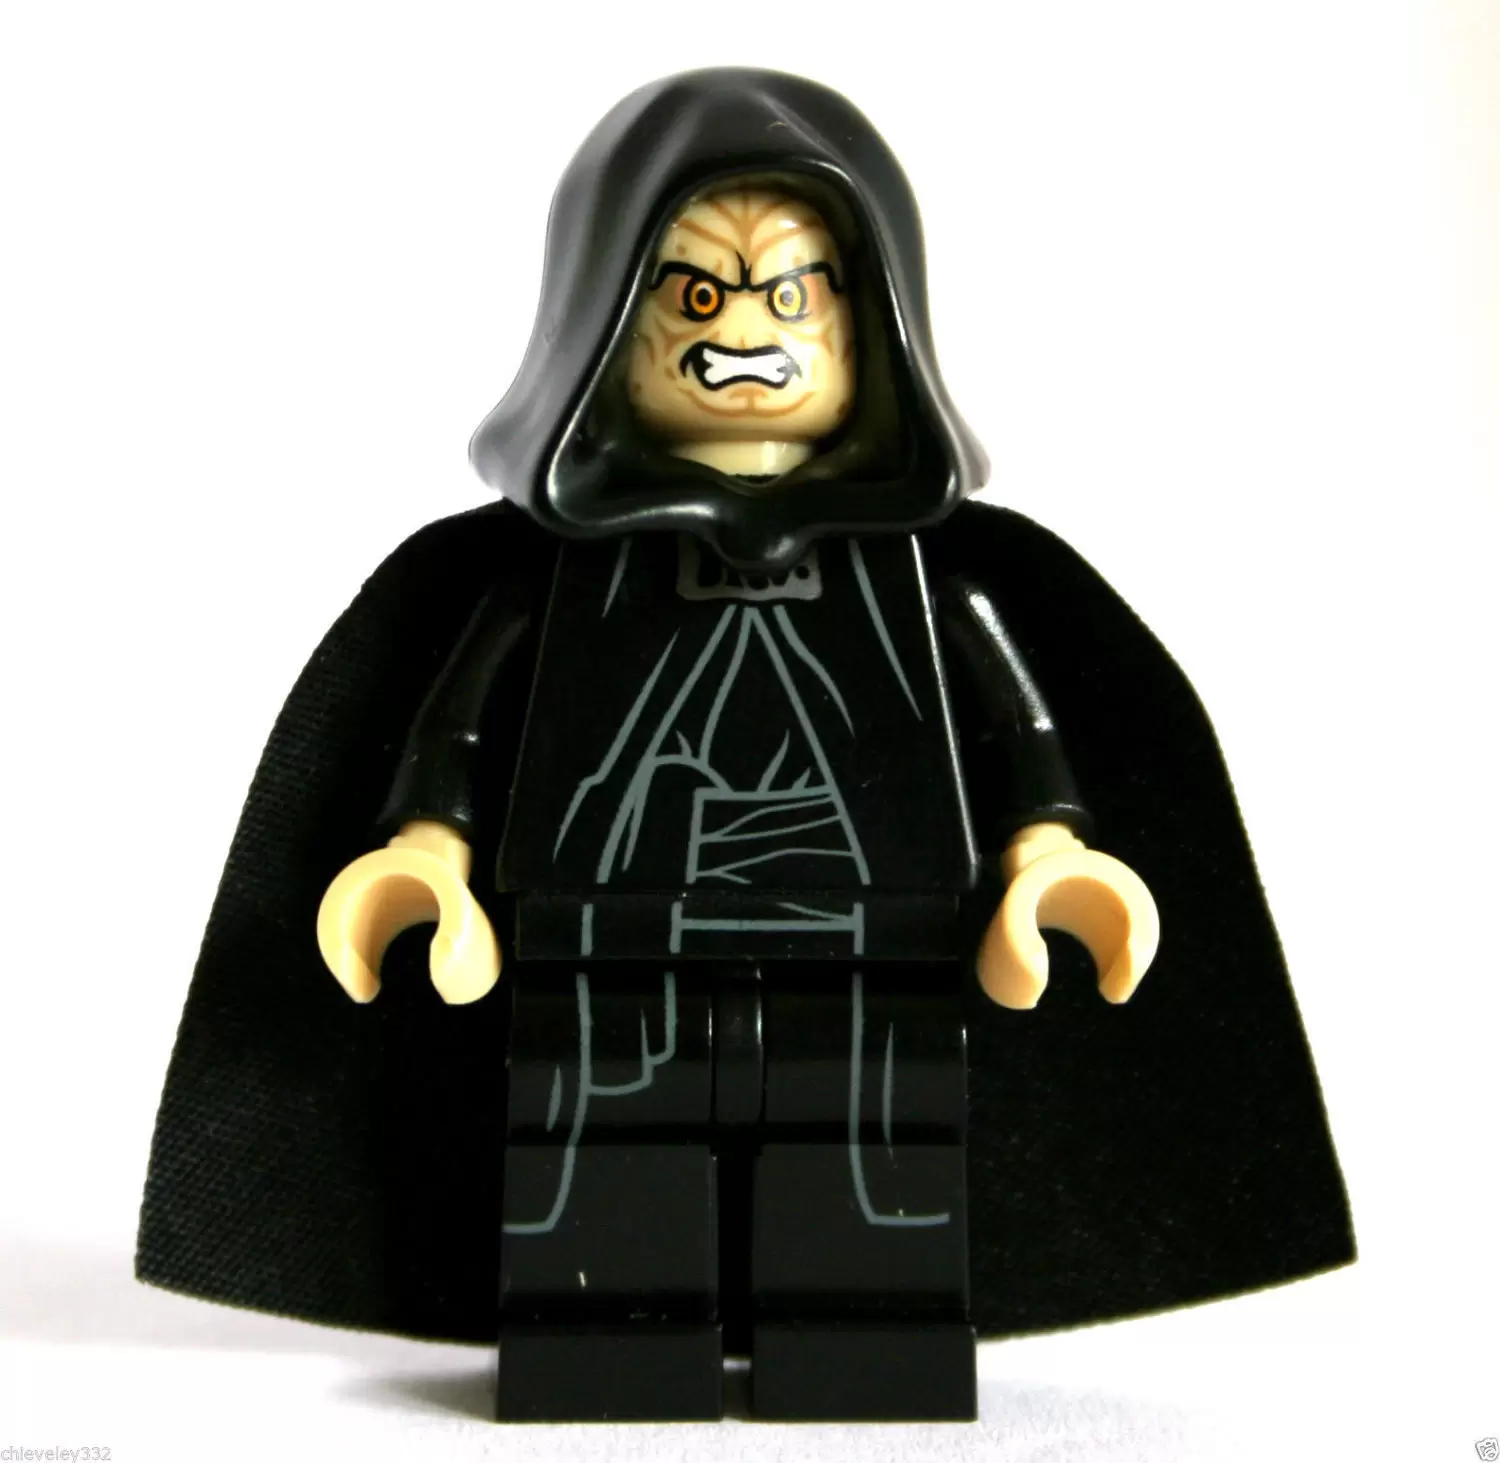 LEGO Star Wars Minifigs - Emperor Palpatine as Darth Sidious with Tan head and hands